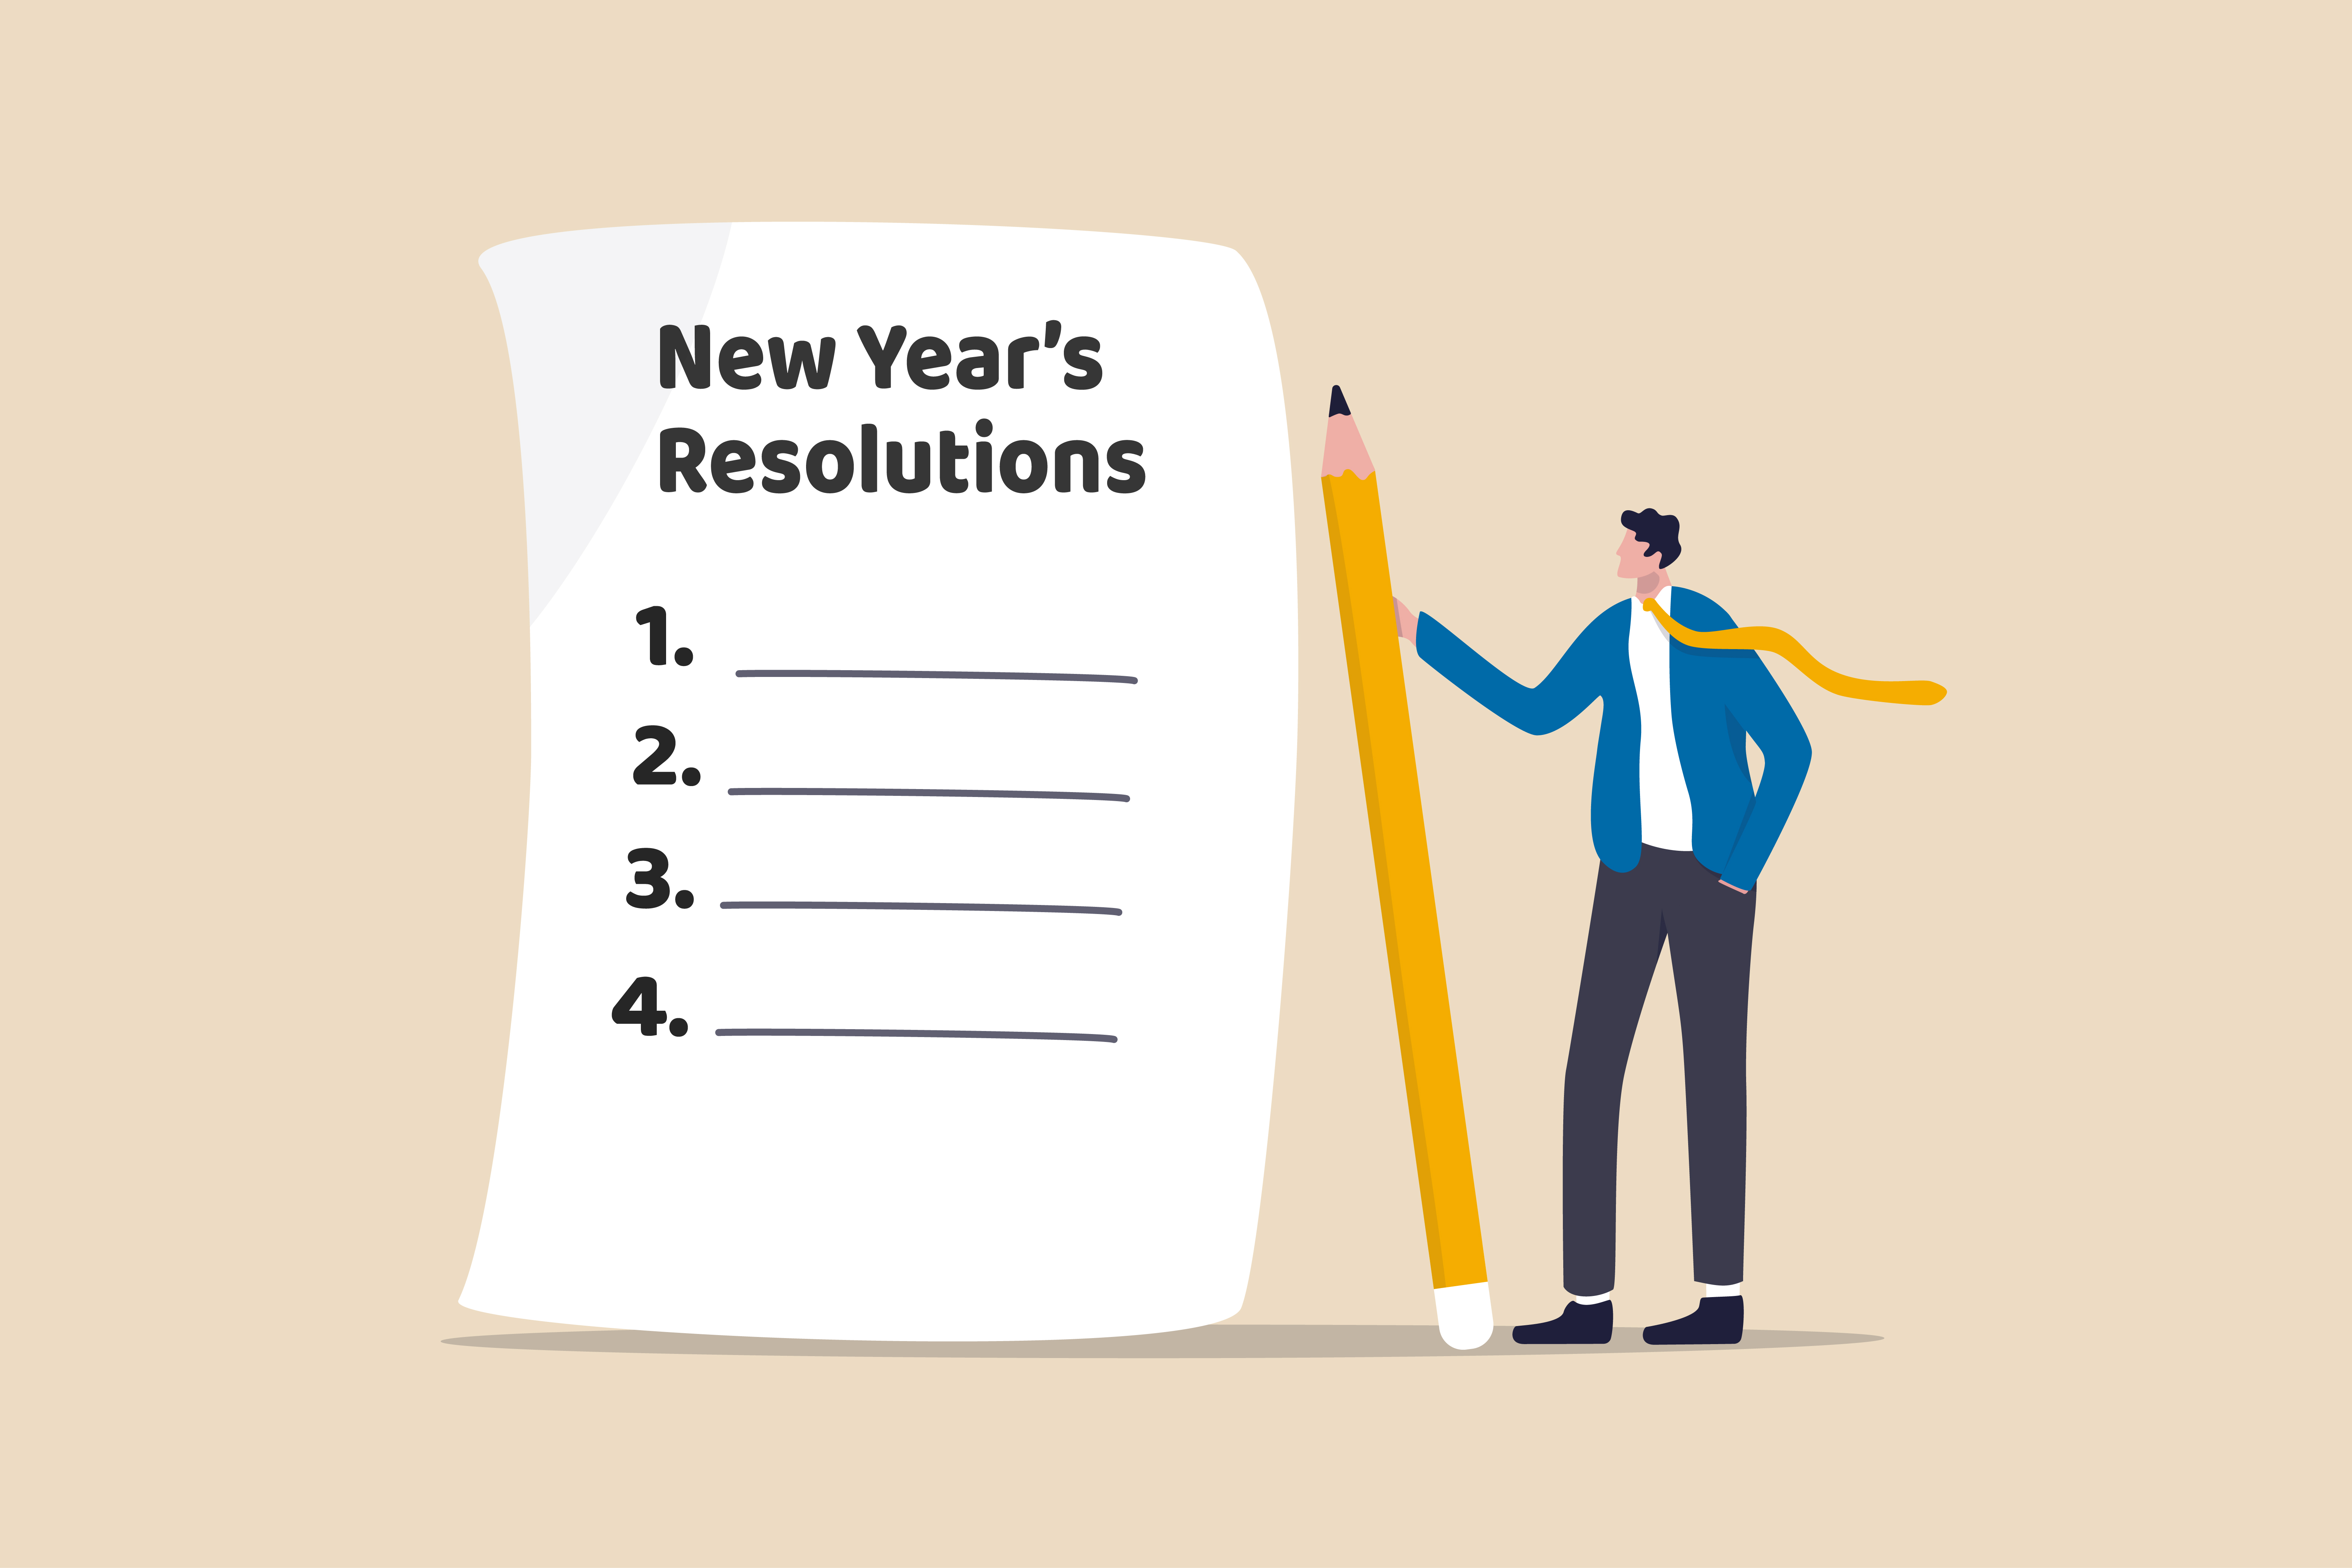 Man with list of New Year's Resolutions